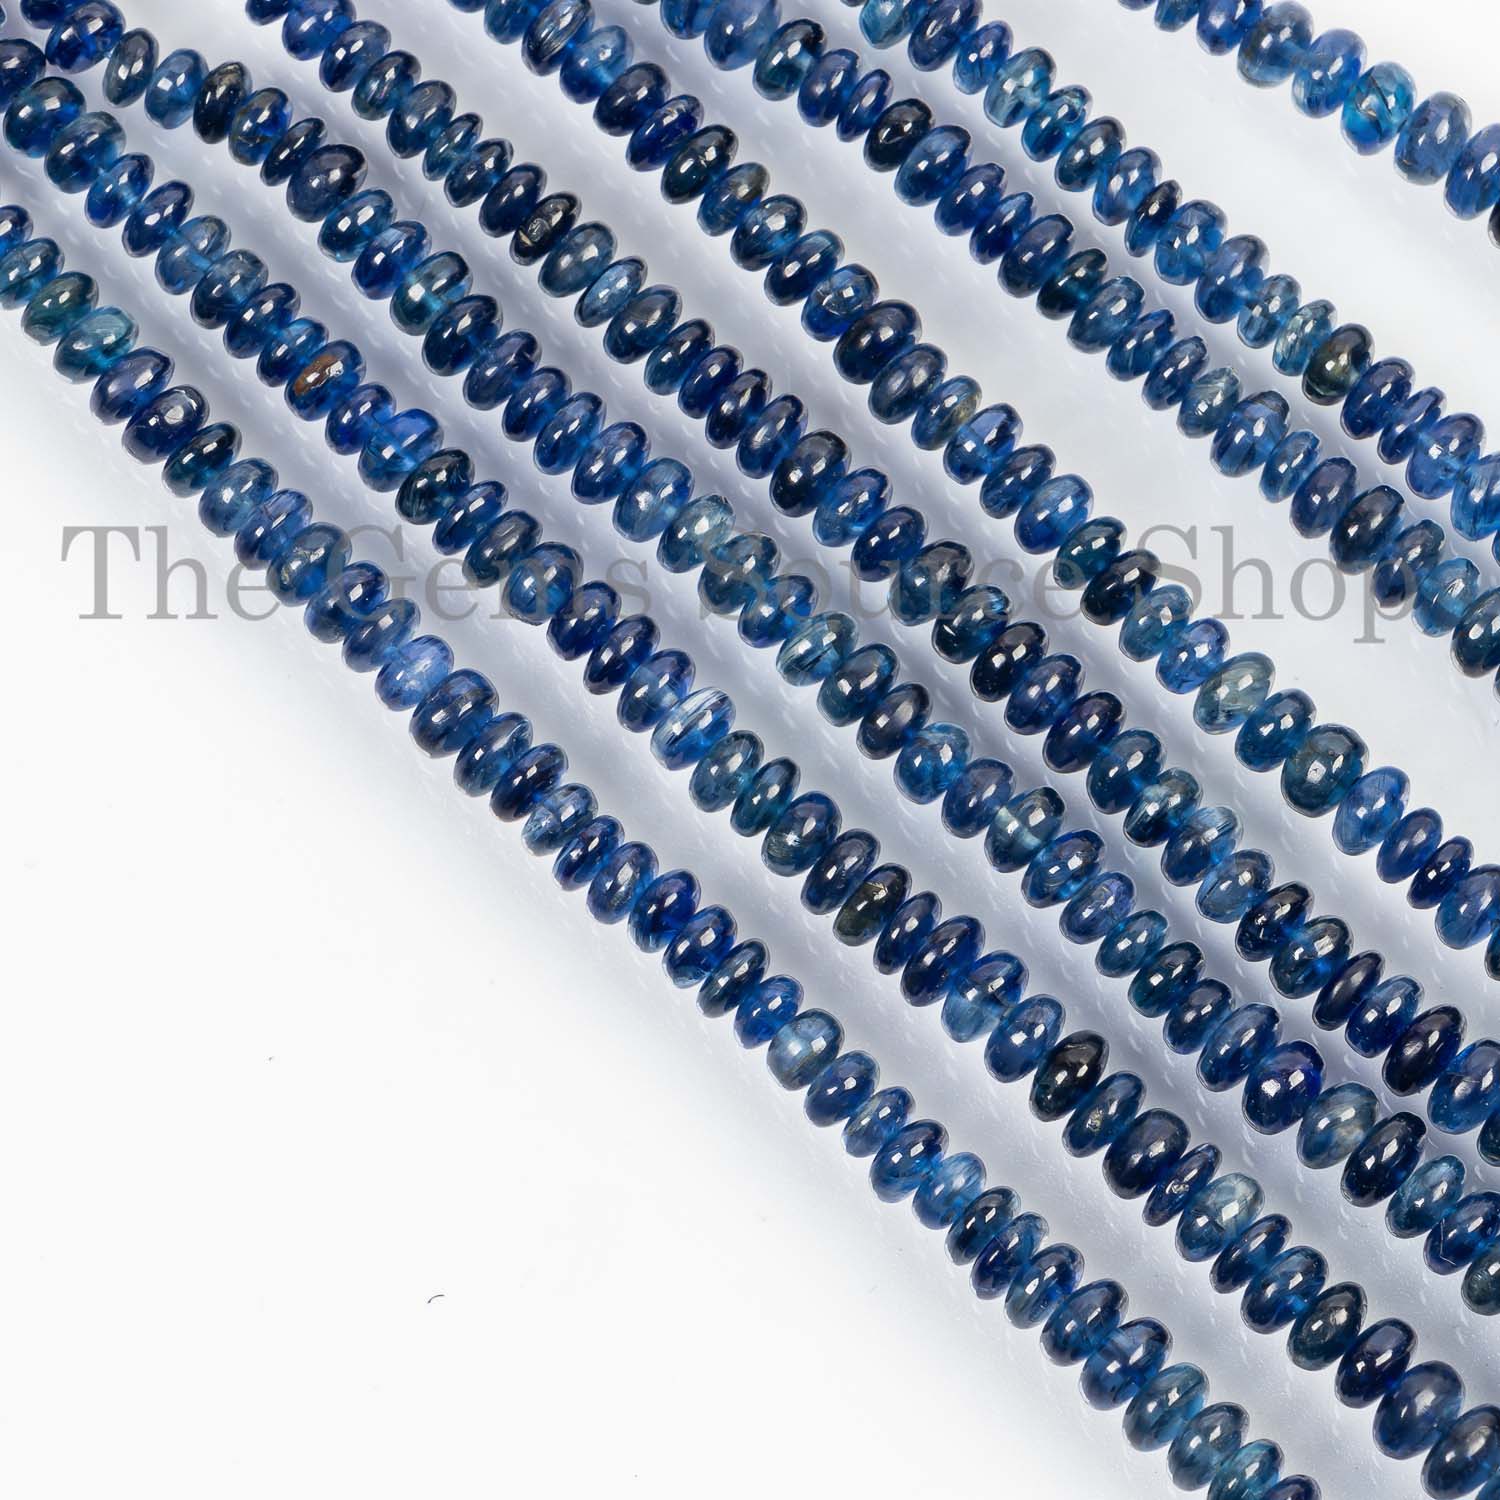 Kyanite Smooth Rondelle Beads, 4-6 mm Kyanite Beads For Making Jewelry